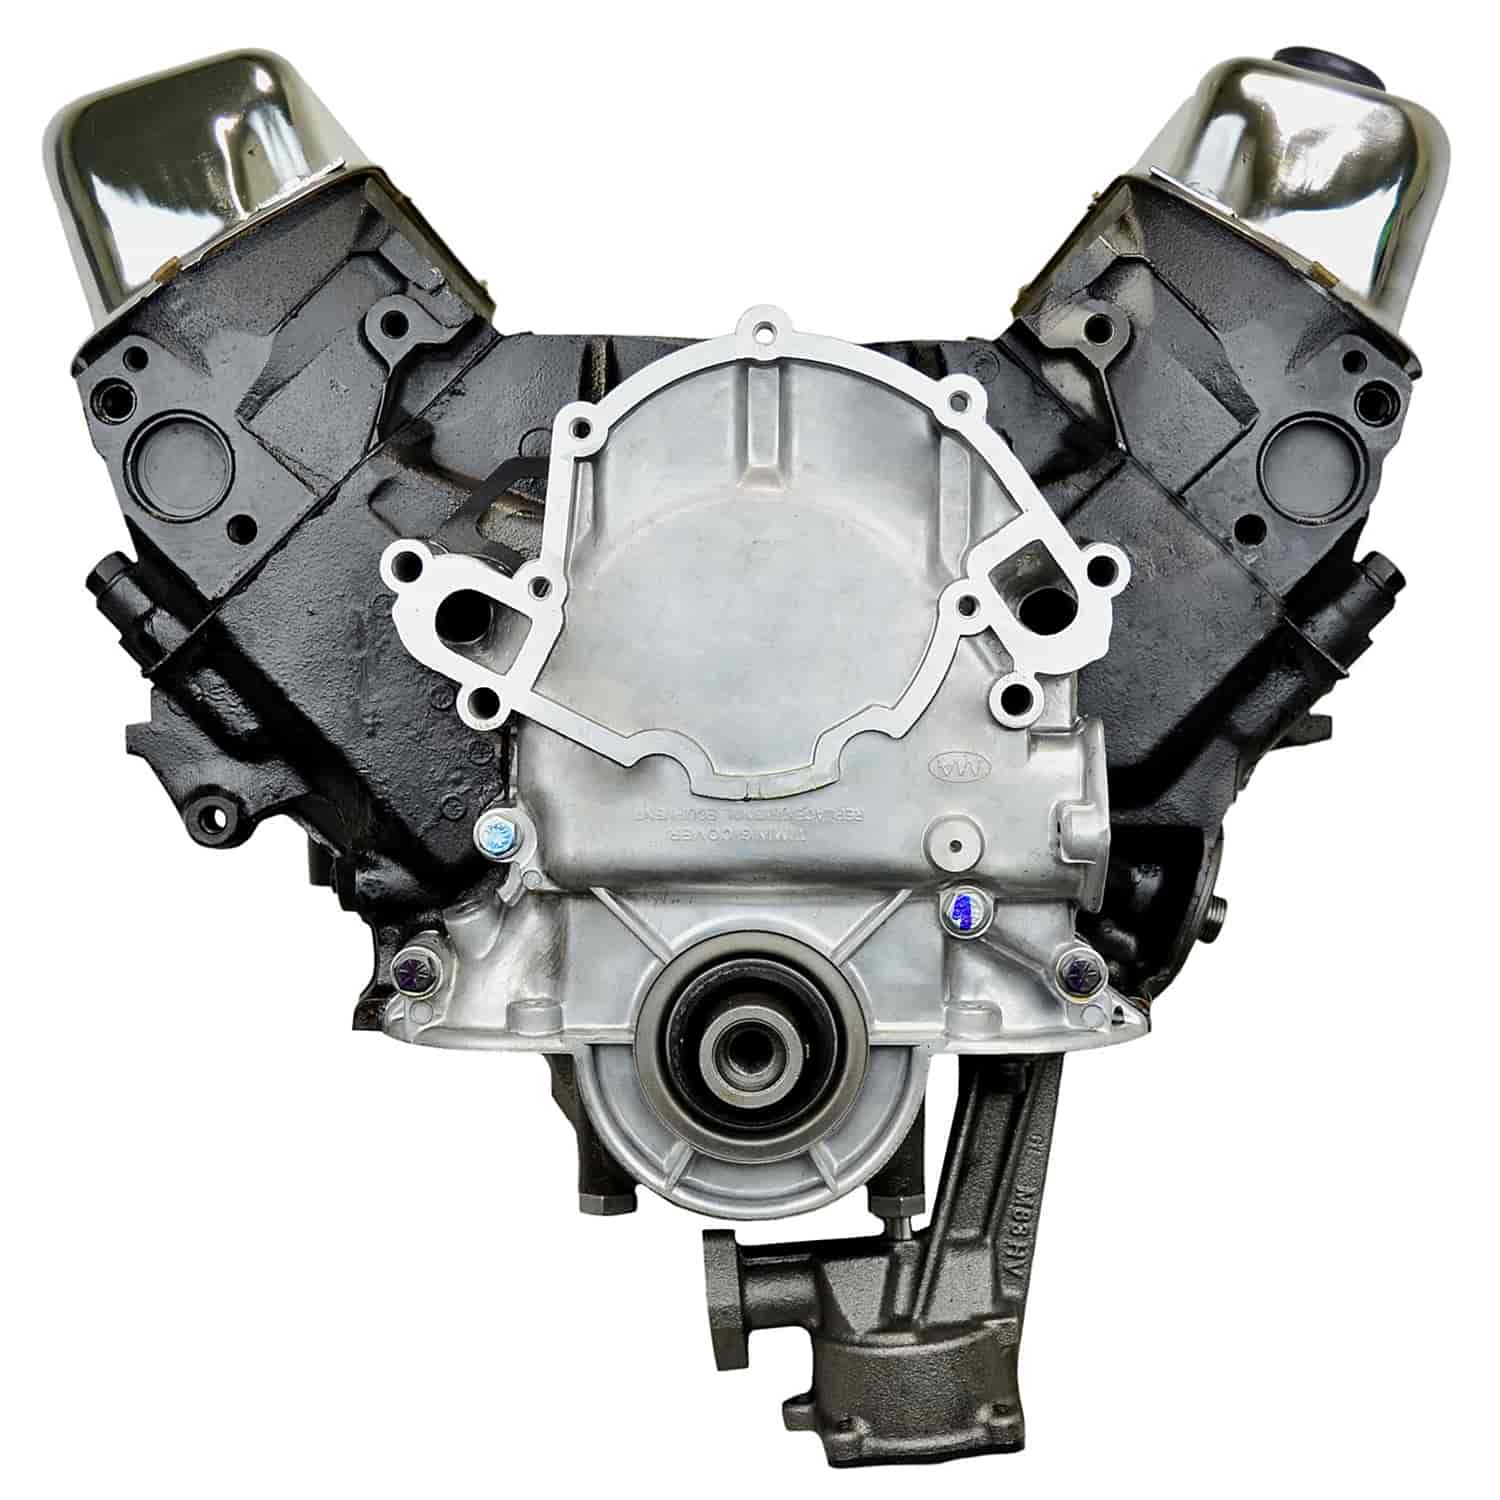 Remanufactured Crate Engine for 1975-1985 Ford/Lincoln/Mercury